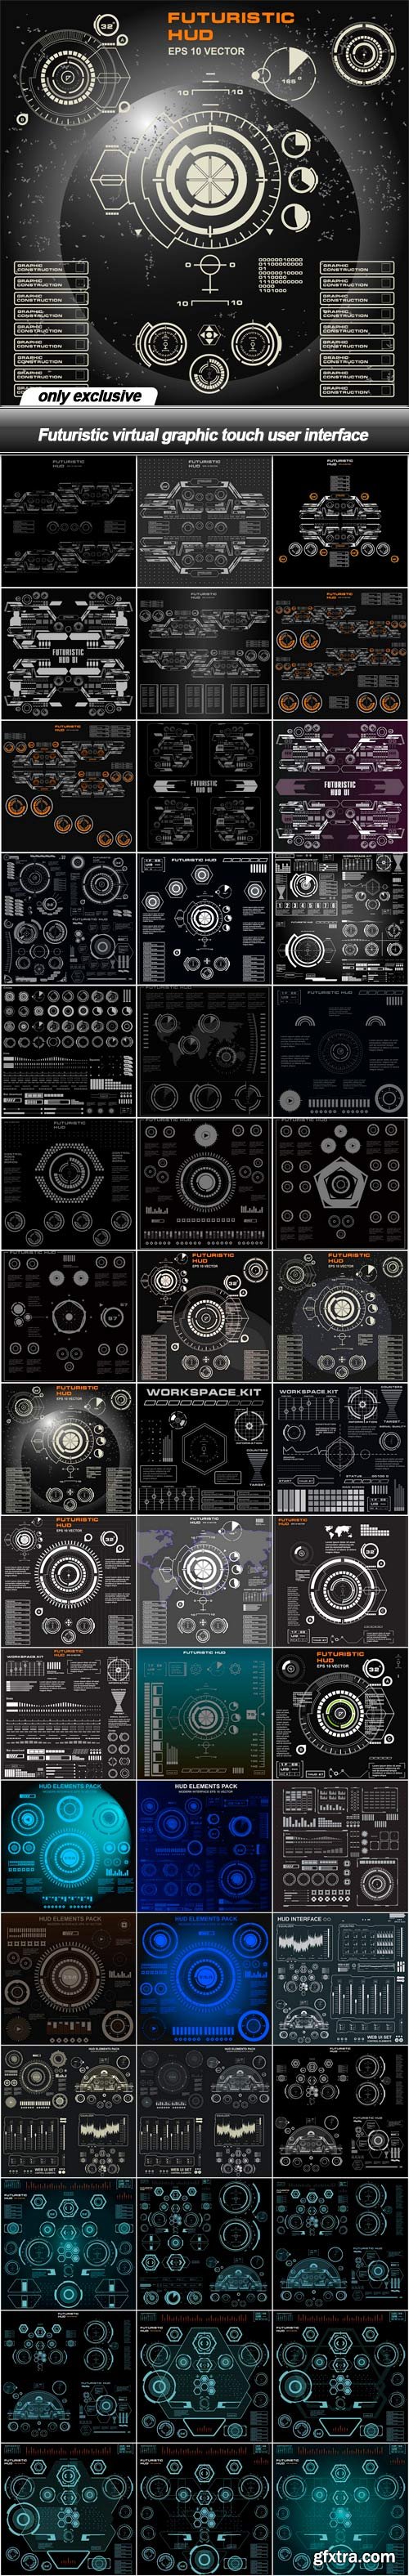 Futuristic virtual graphic touch user interface - 48 EPS